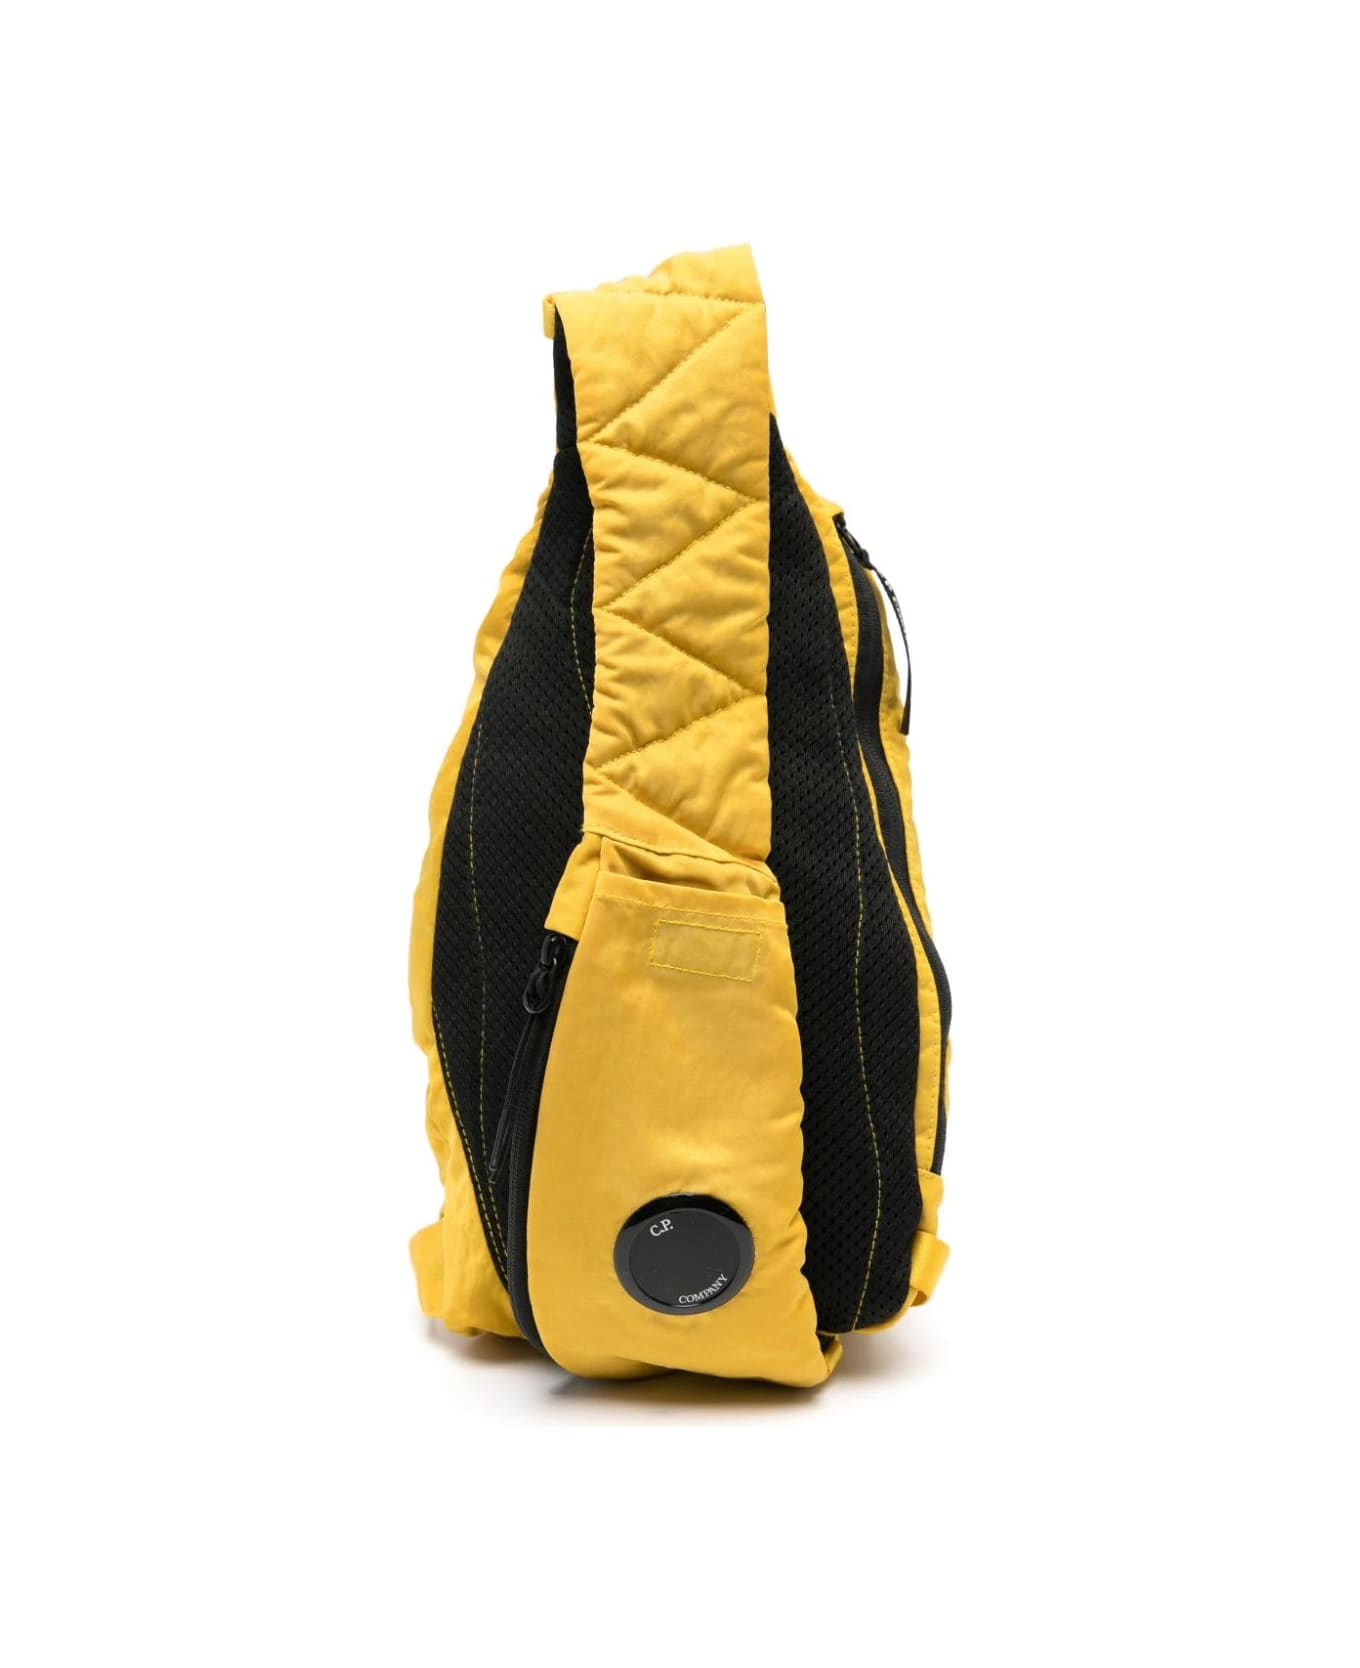 C.P. Company Undersixteen Backpack With Shoulder Strap - Yellow